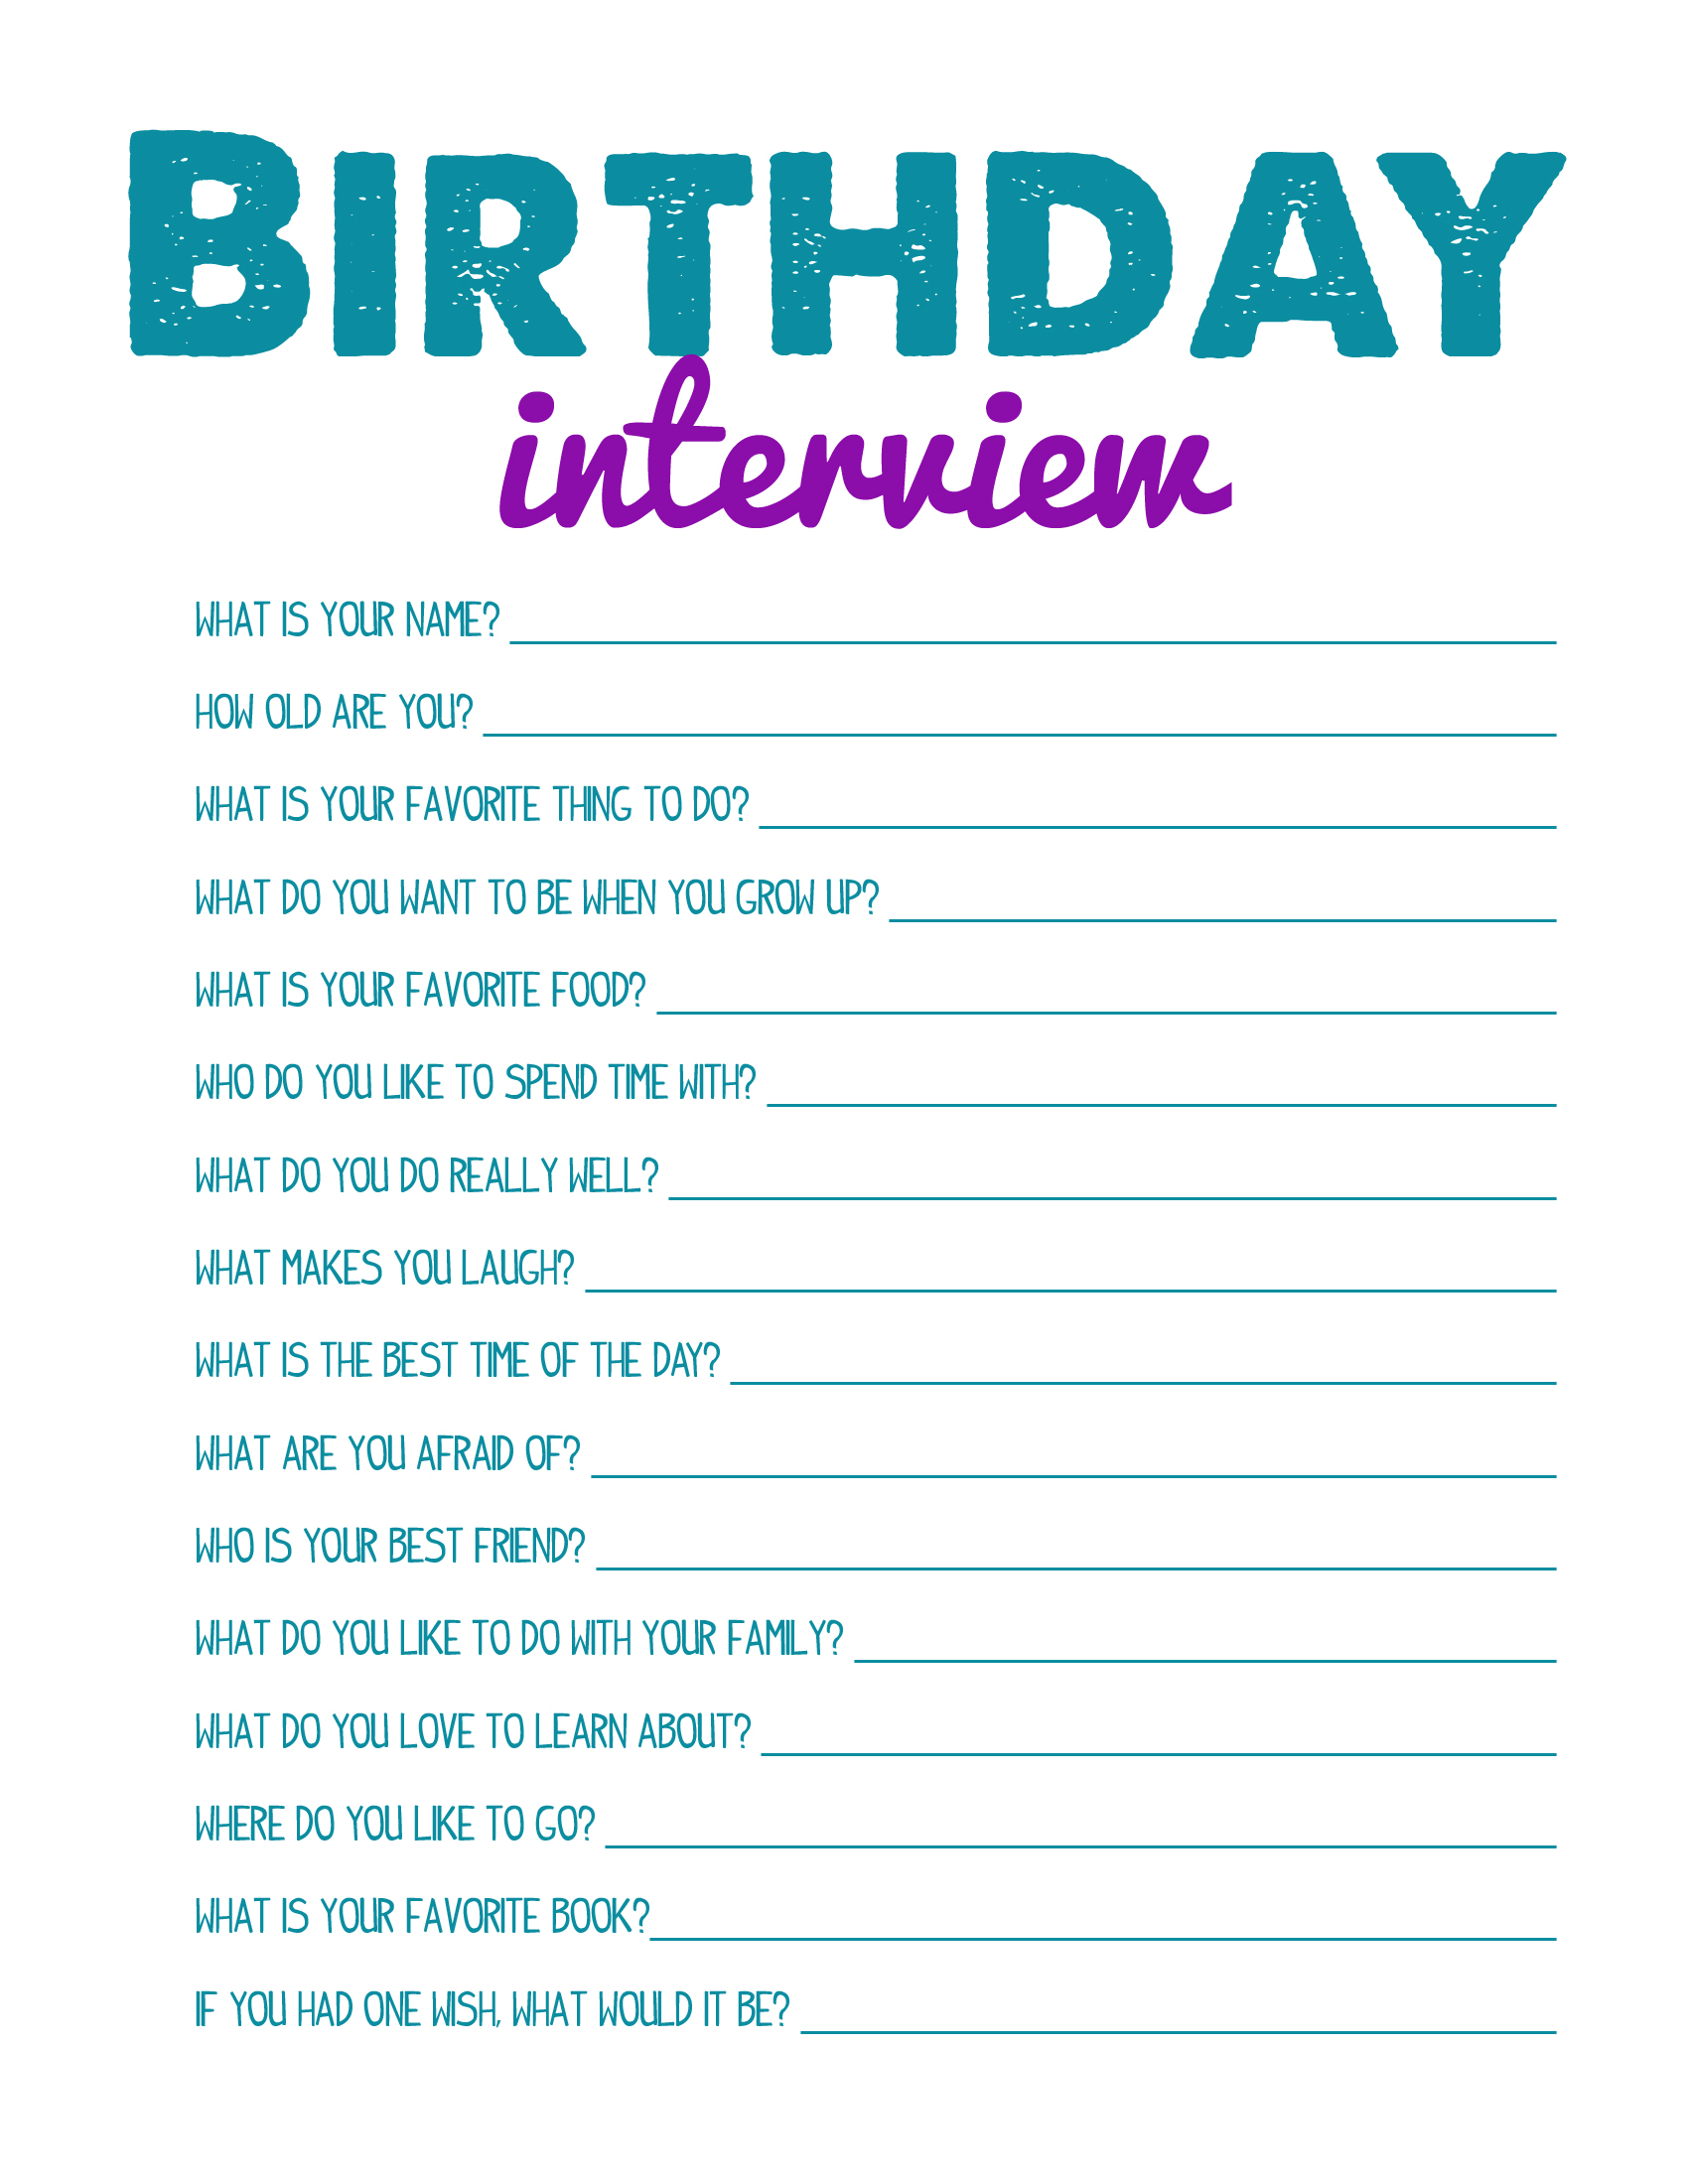 Birthday Printable Images Gallery Category Page 2 Printablee